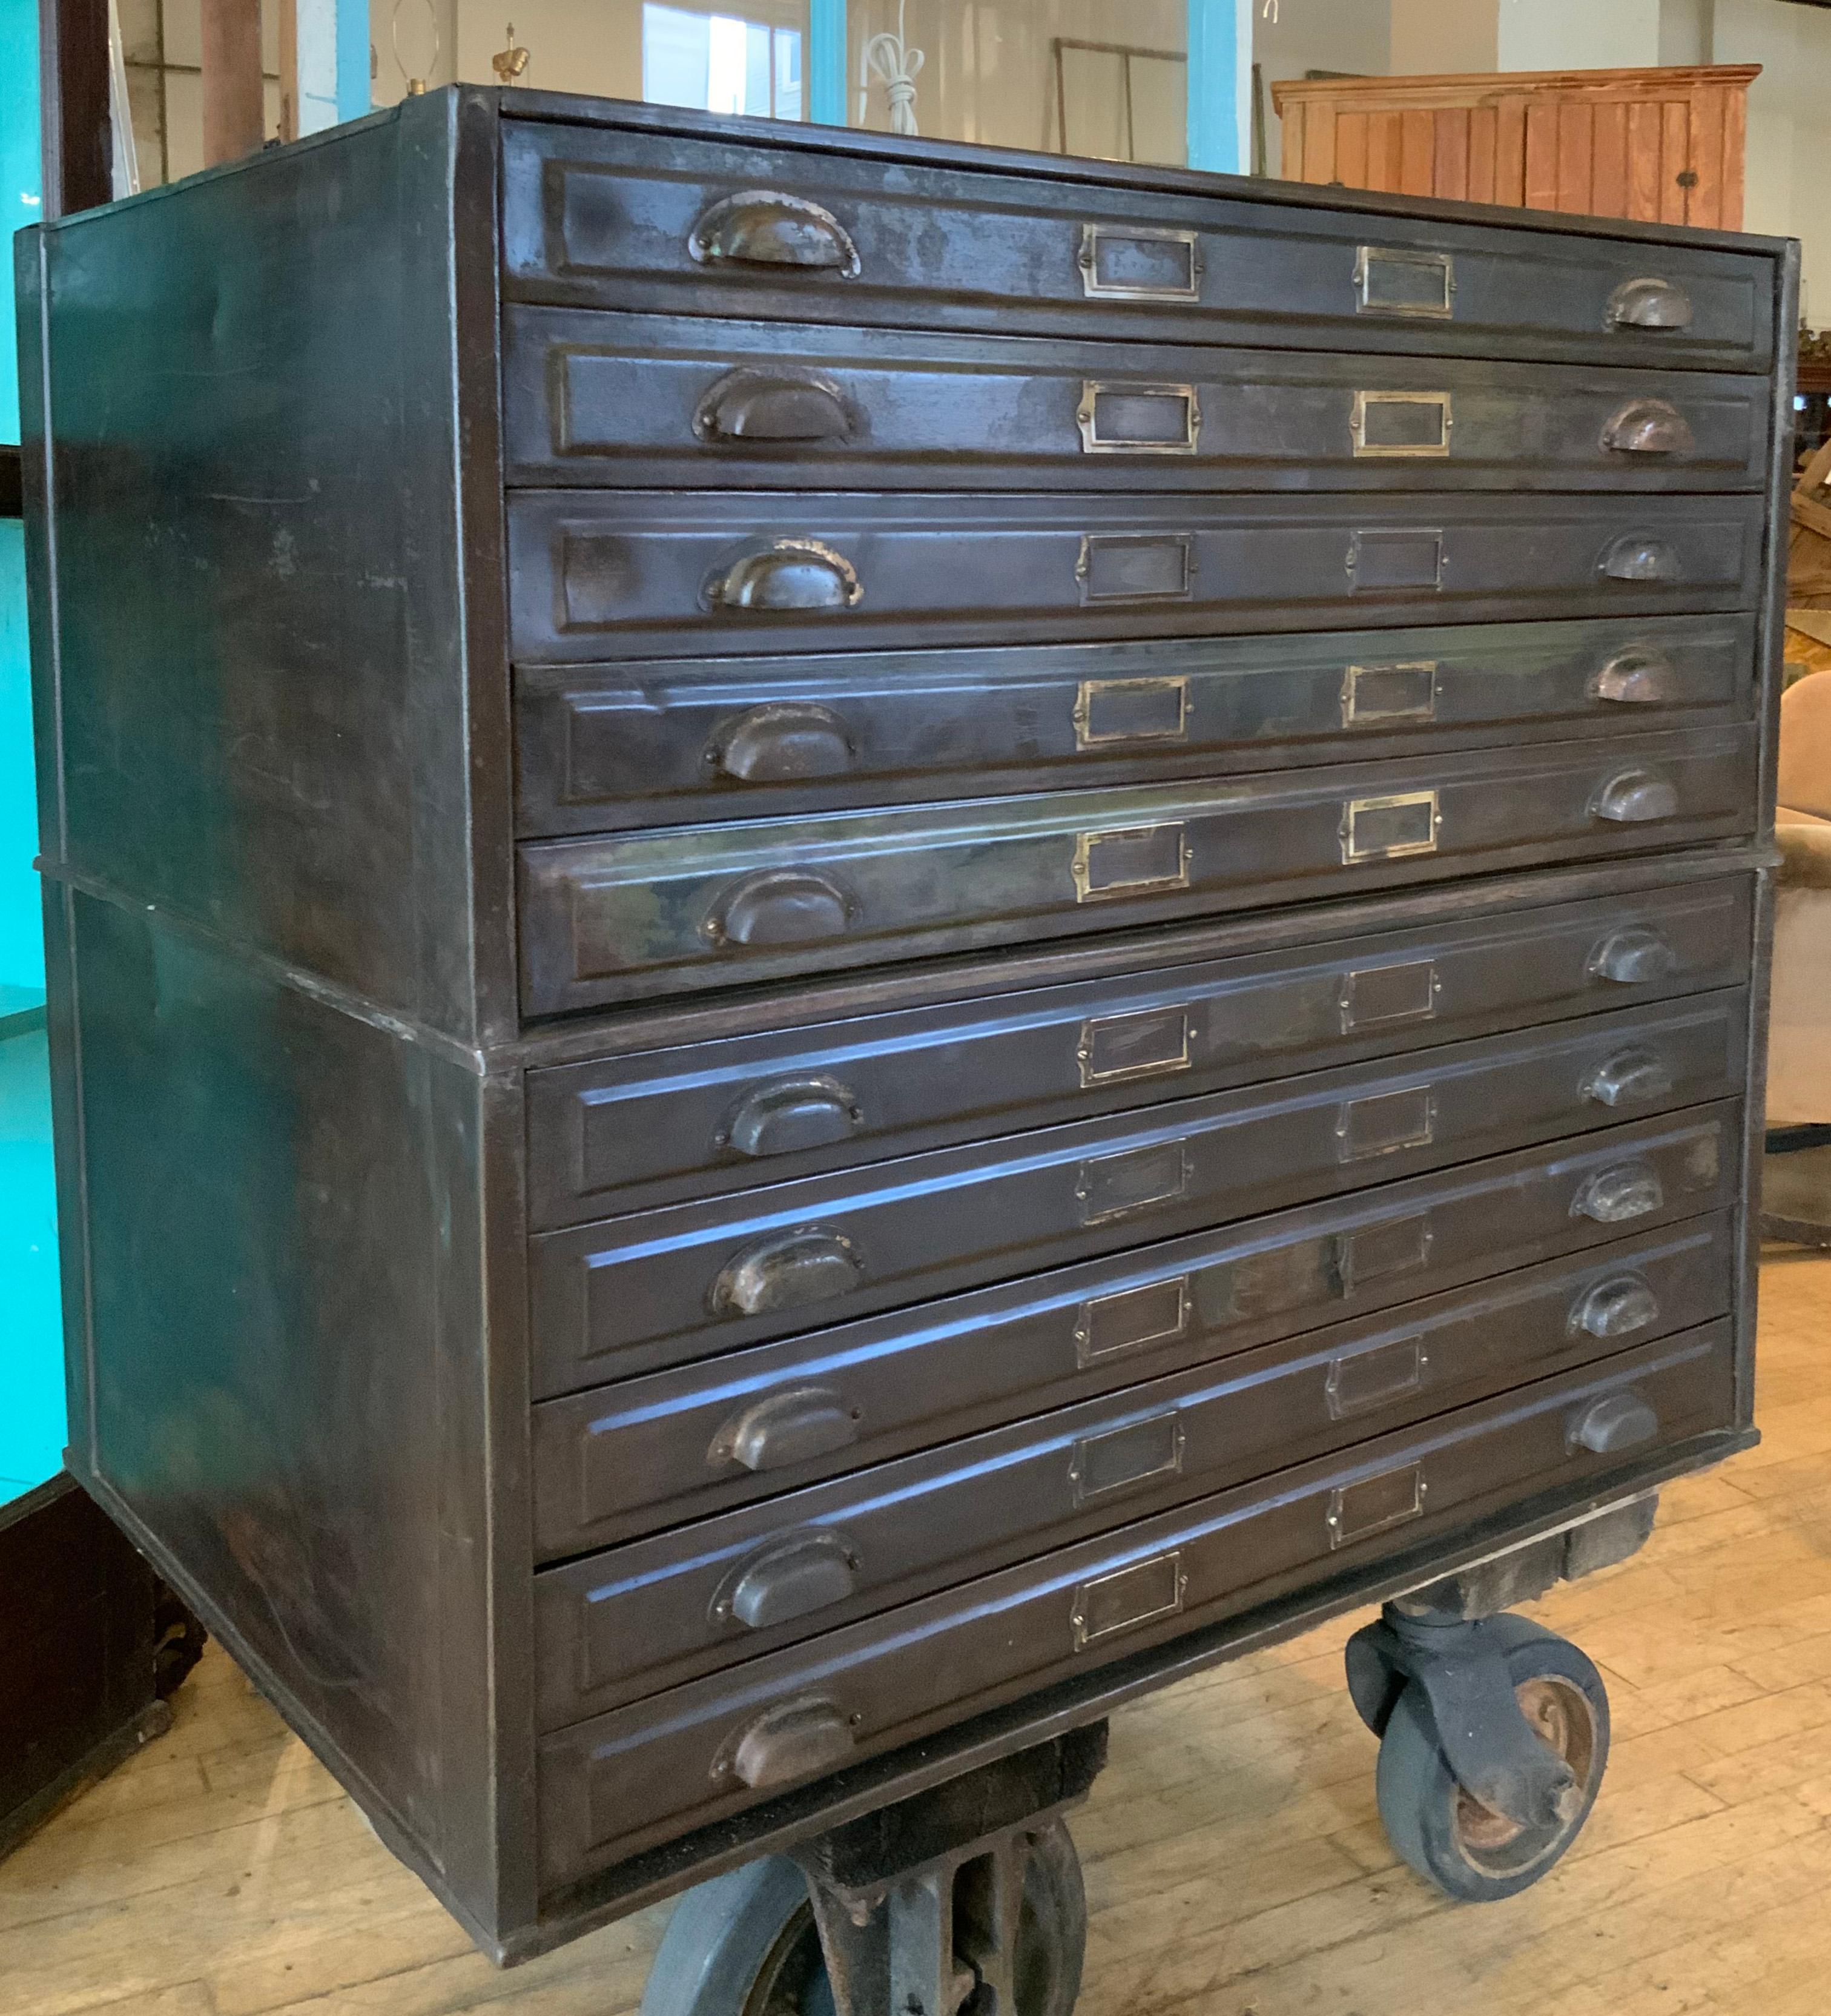 A very handsome double set of antique 1920's steel flat files, in their original dark green/black painted finish. each case has five wide drawers, some divided, some full width. each drawer has its original hinged steel flap for keeping the contents